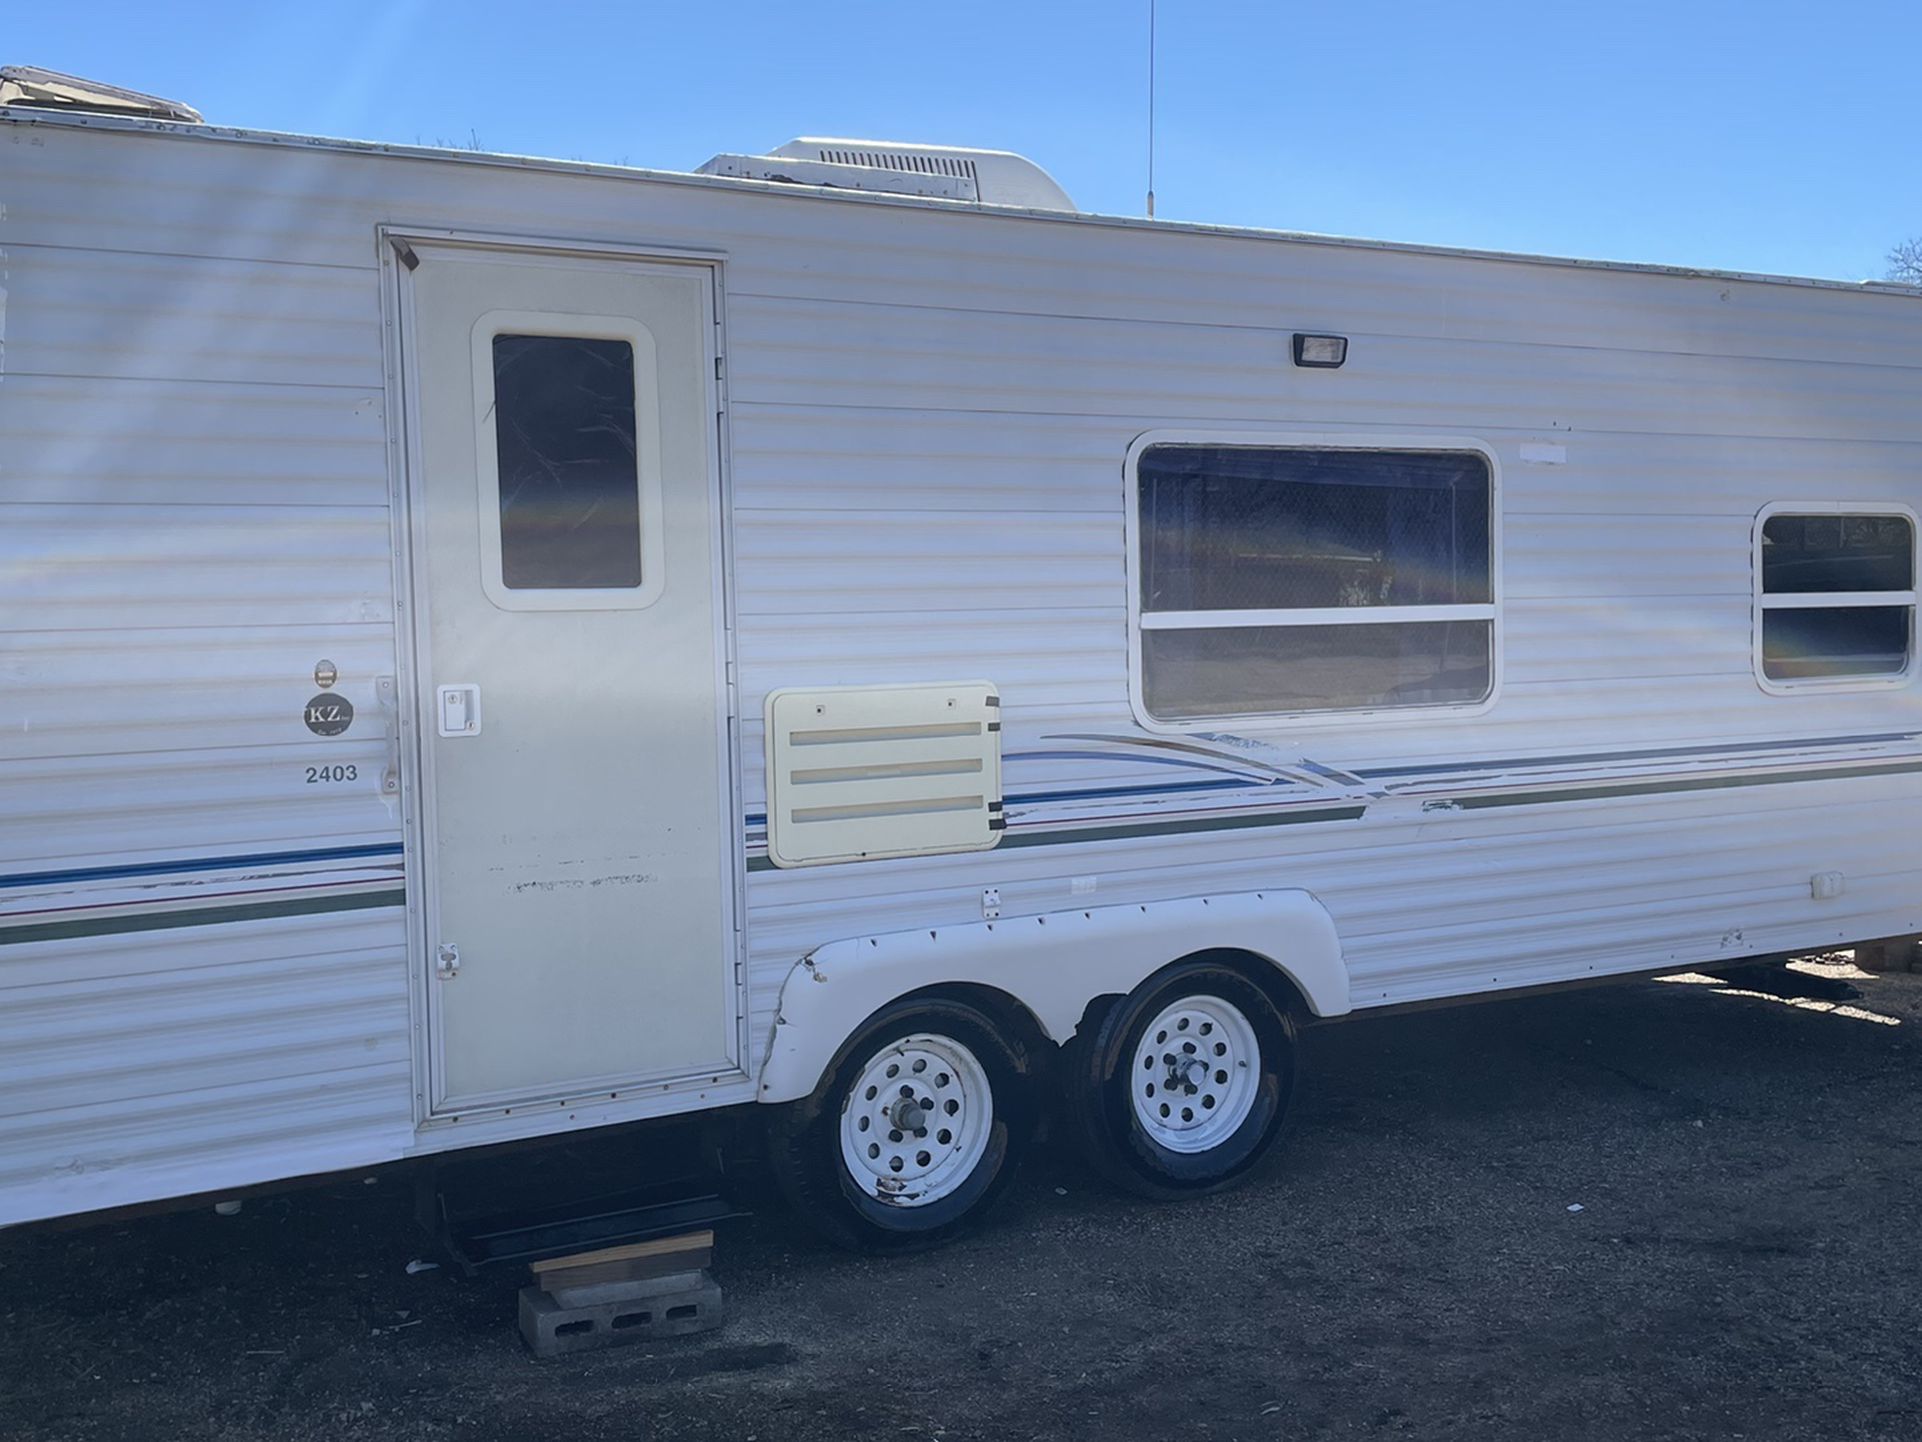 2002 Sport Bumper pull 25 feet travel trailer Fully self-contained No title bill of sale sleeps 4 Ac and Heat Fridge raider Microwave Stove Plasma T